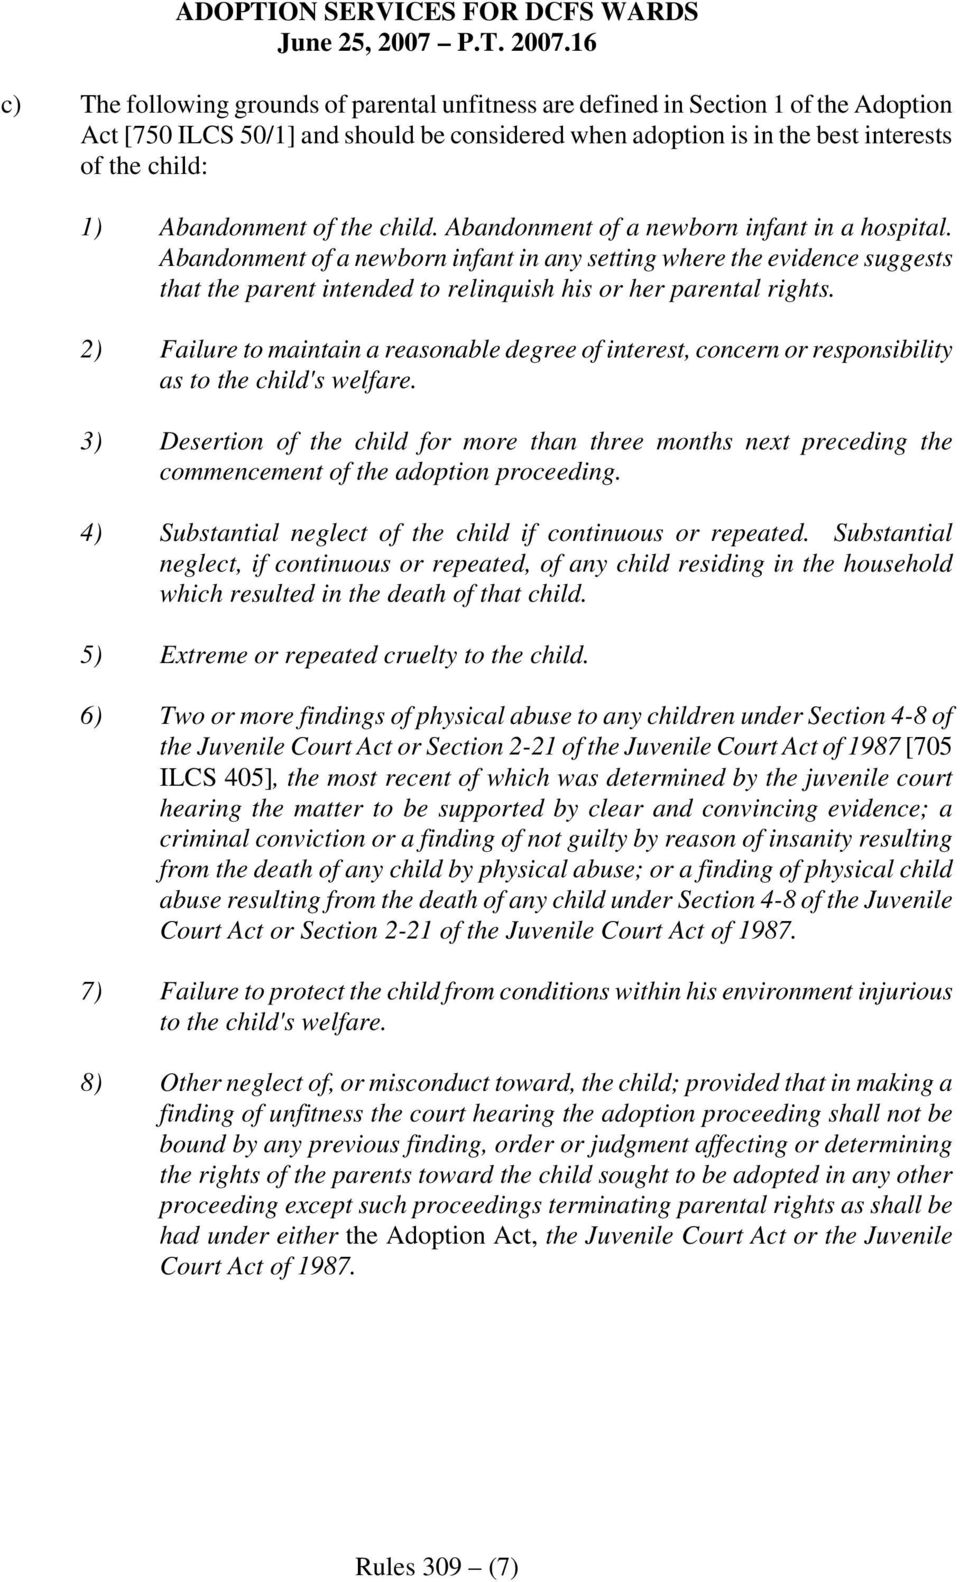 Abandonment of a newborn infant in any setting where the evidence suggests that the parent intended to relinquish his or her parental rights.